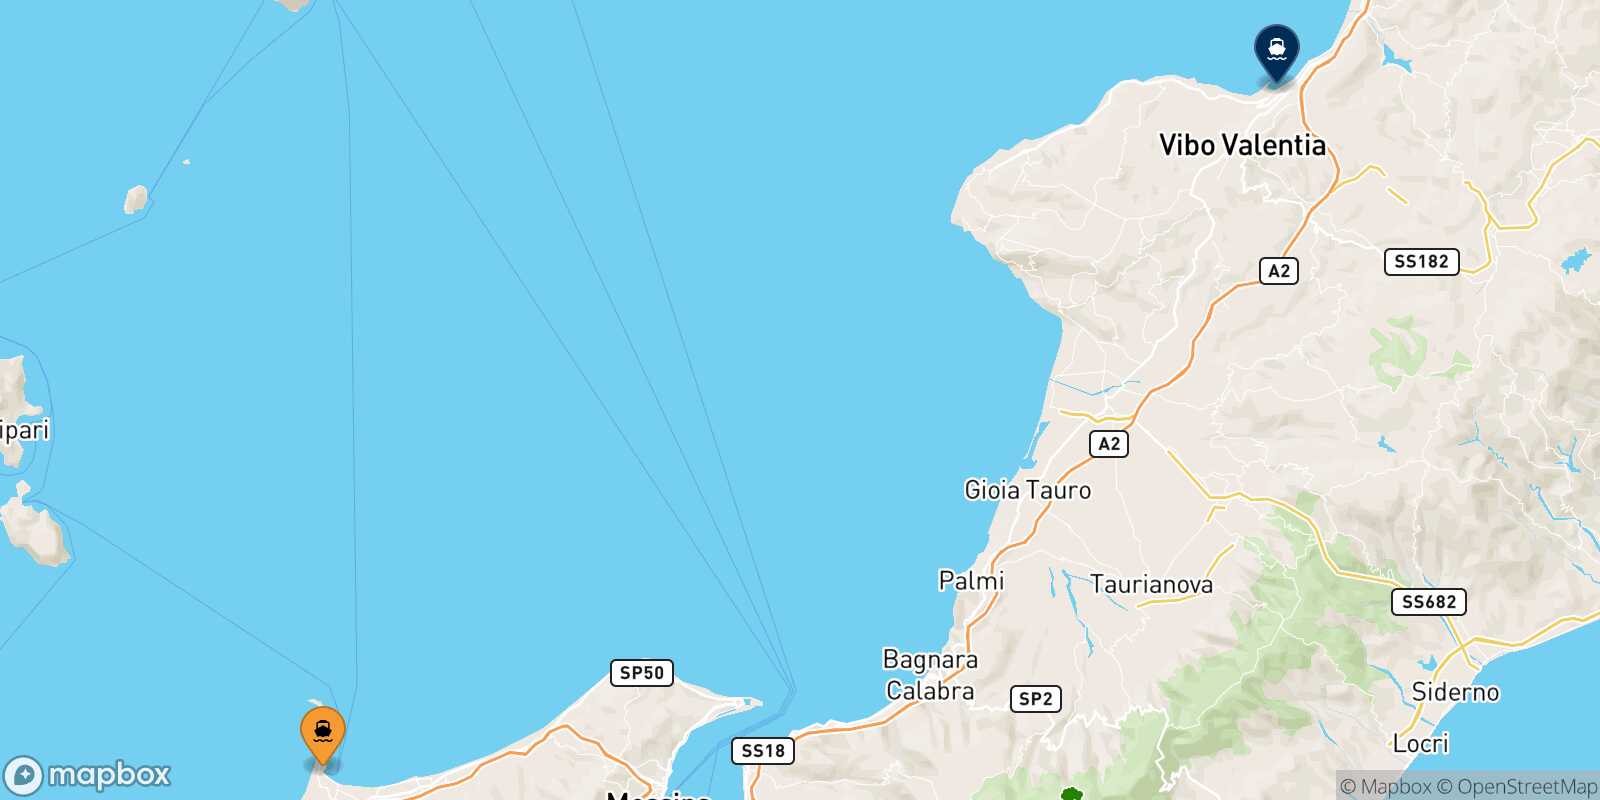 Map of the ports connected with  Vibo Valentia